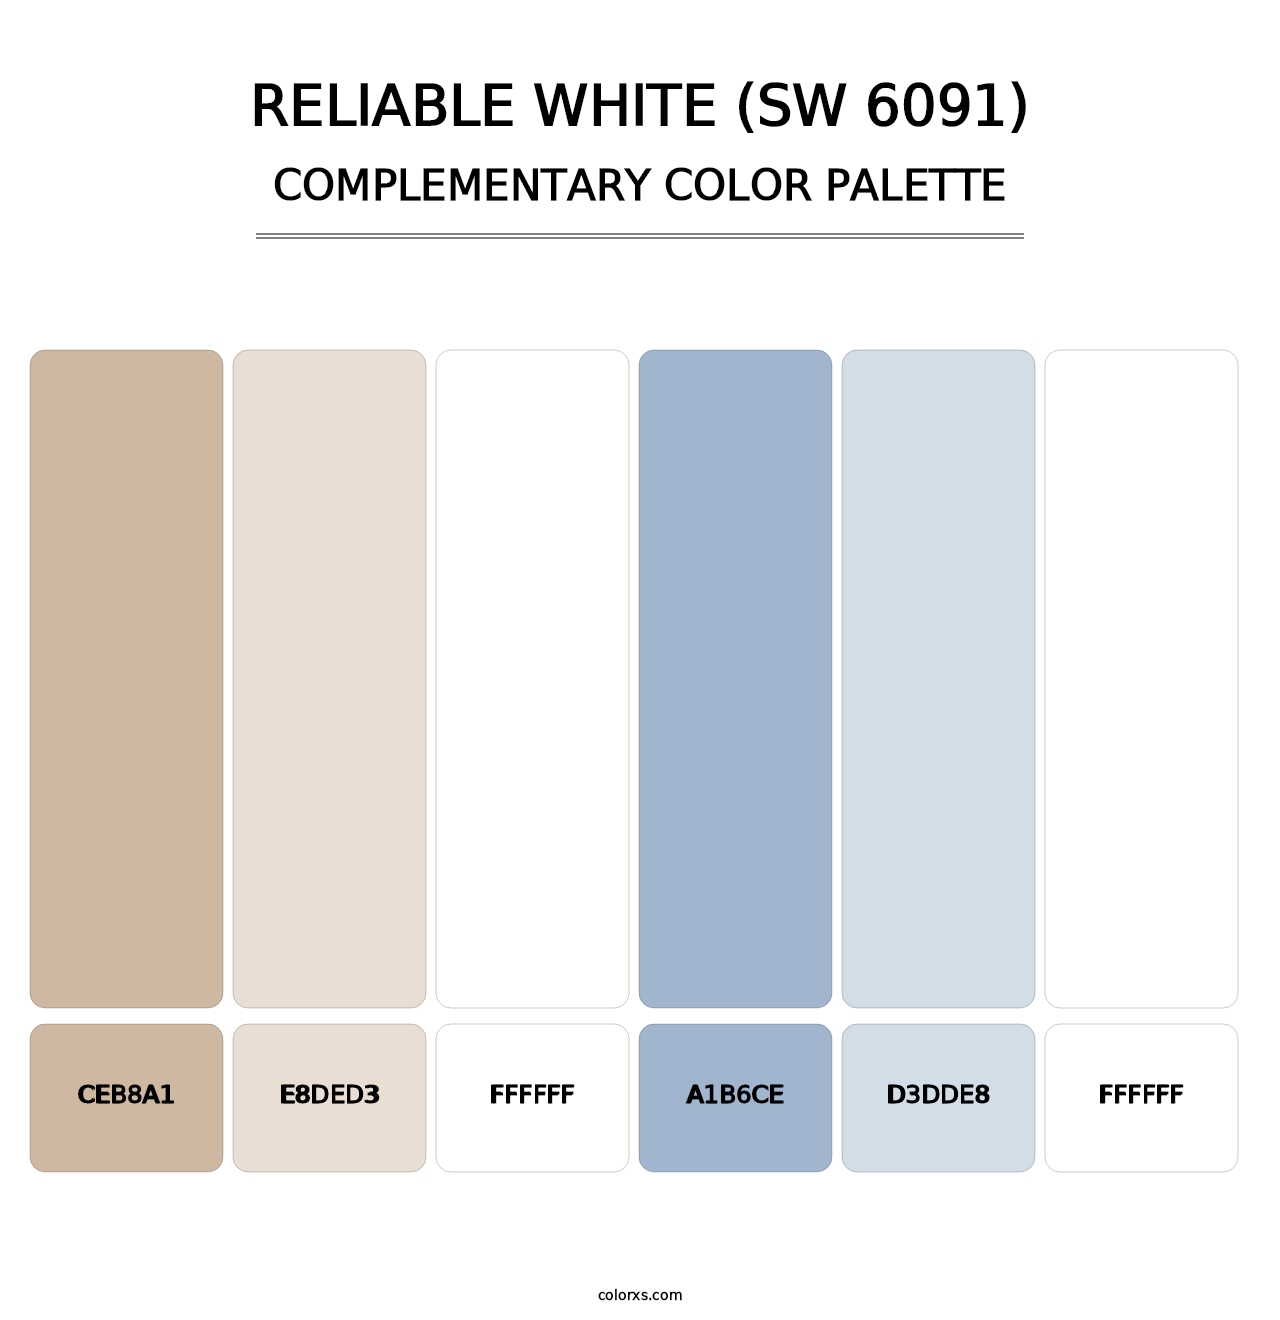 Reliable White (SW 6091) - Complementary Color Palette